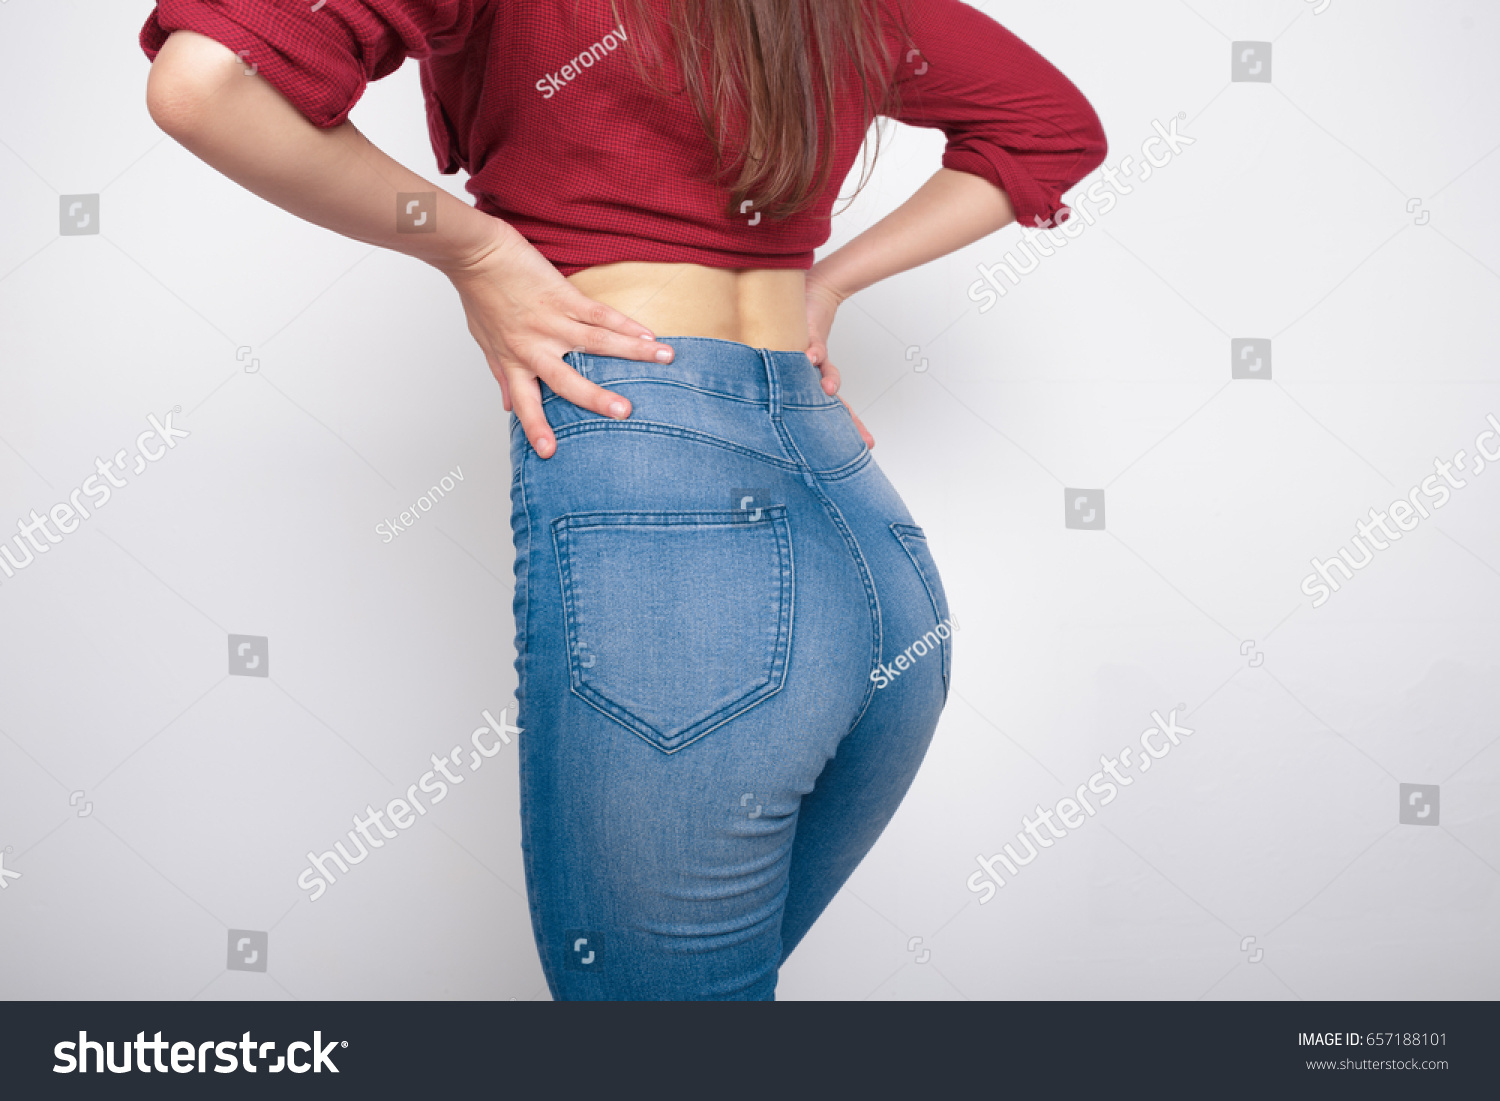 Big Ass In Tight Pants